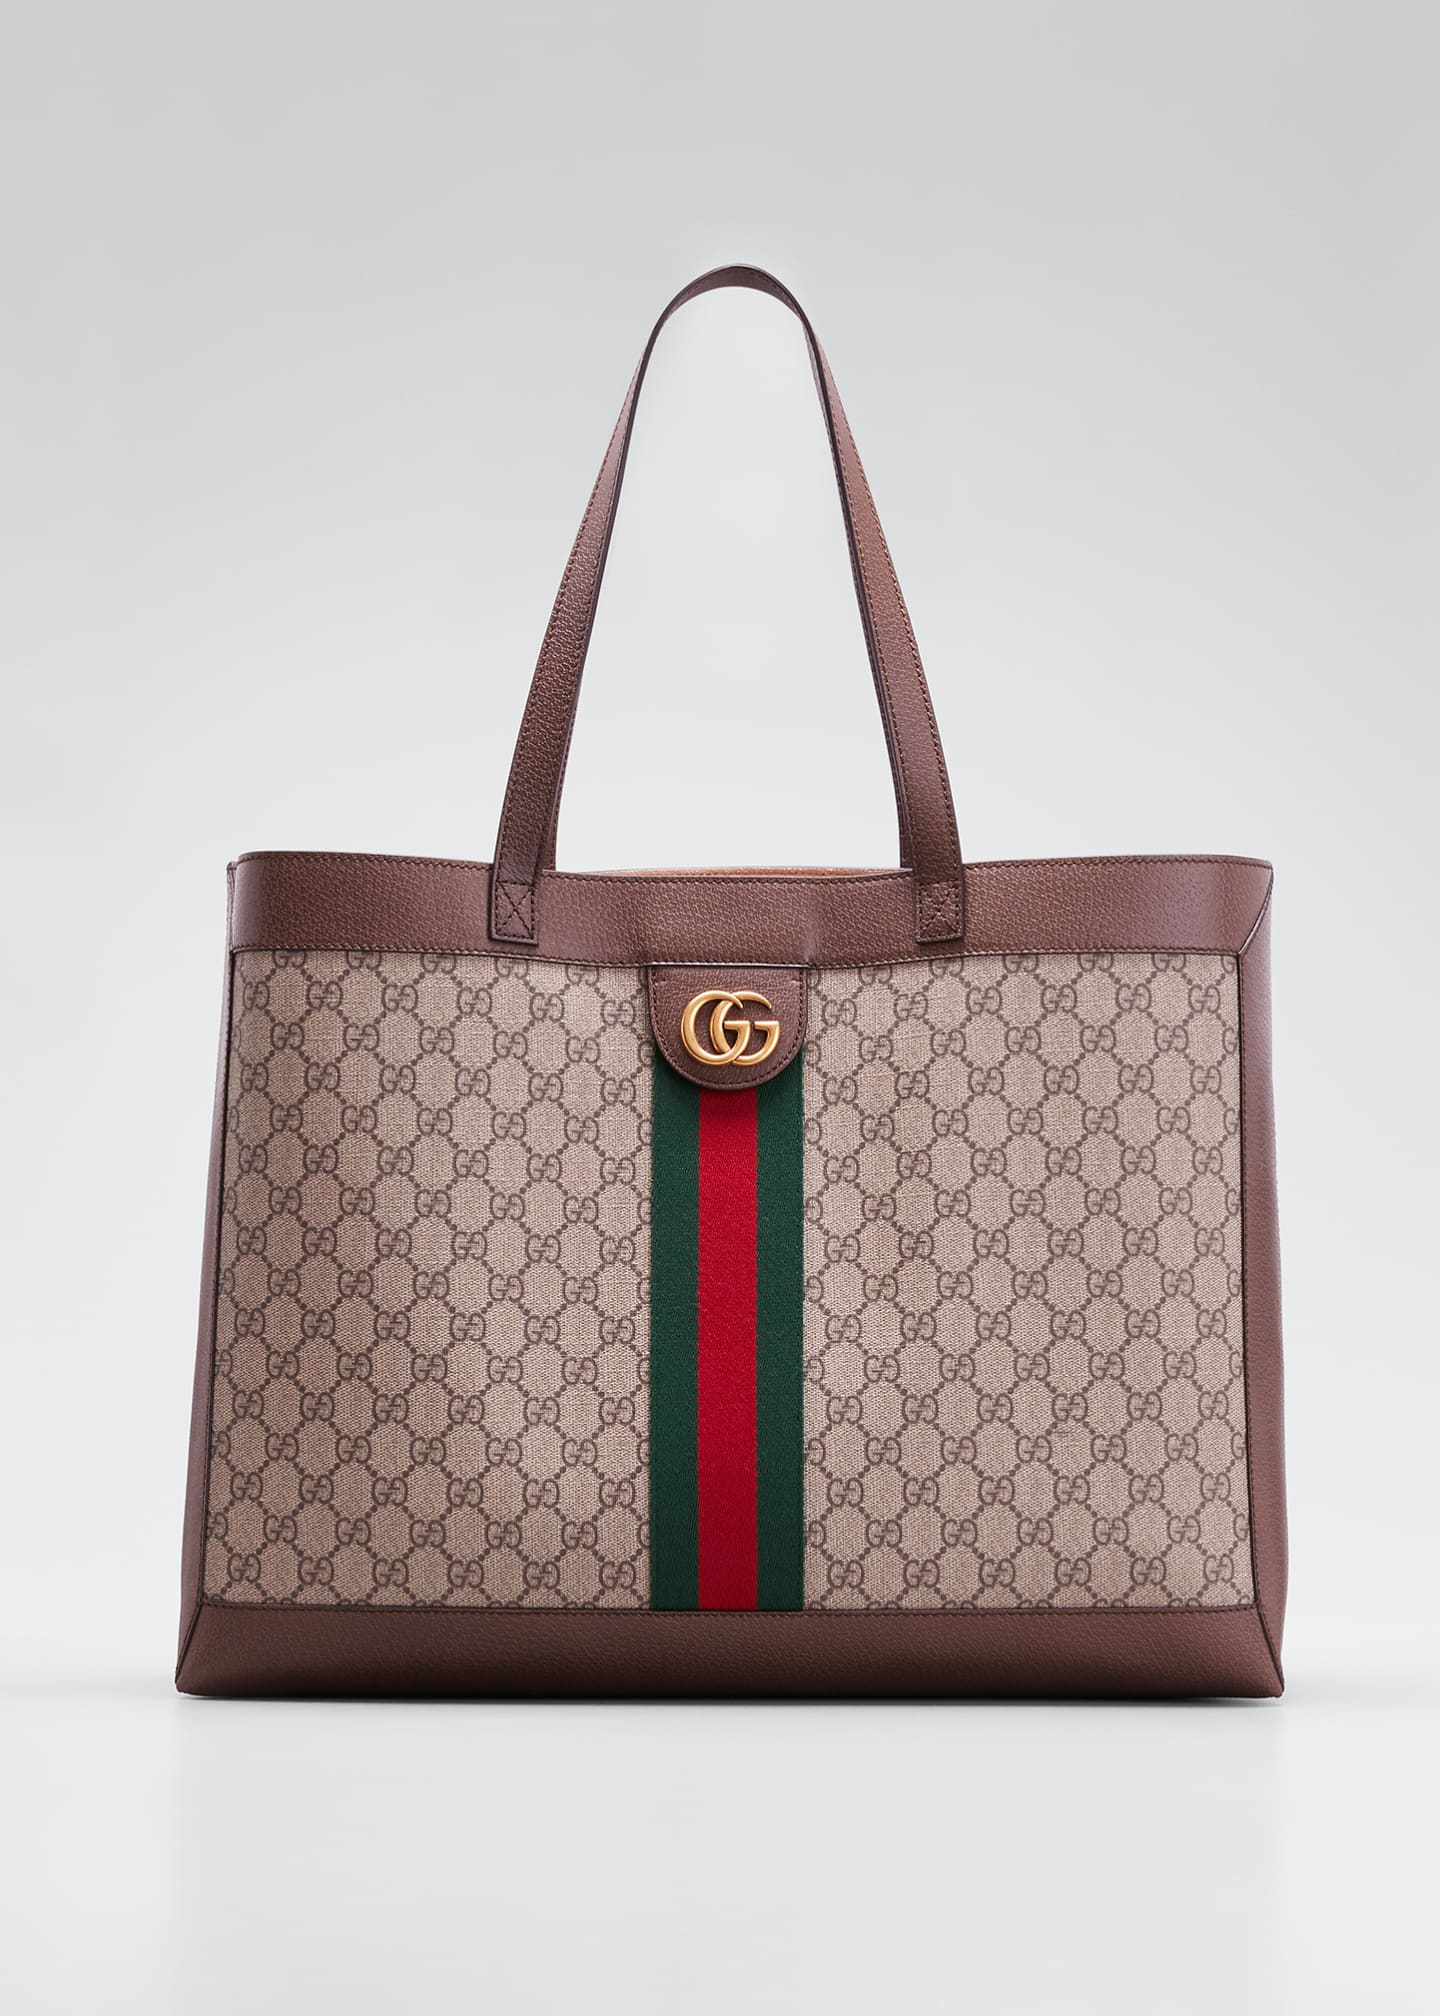 Gucci Ophidia Soft GG Supreme Canvas Tote Bag with Web - Bergdorf Goodman